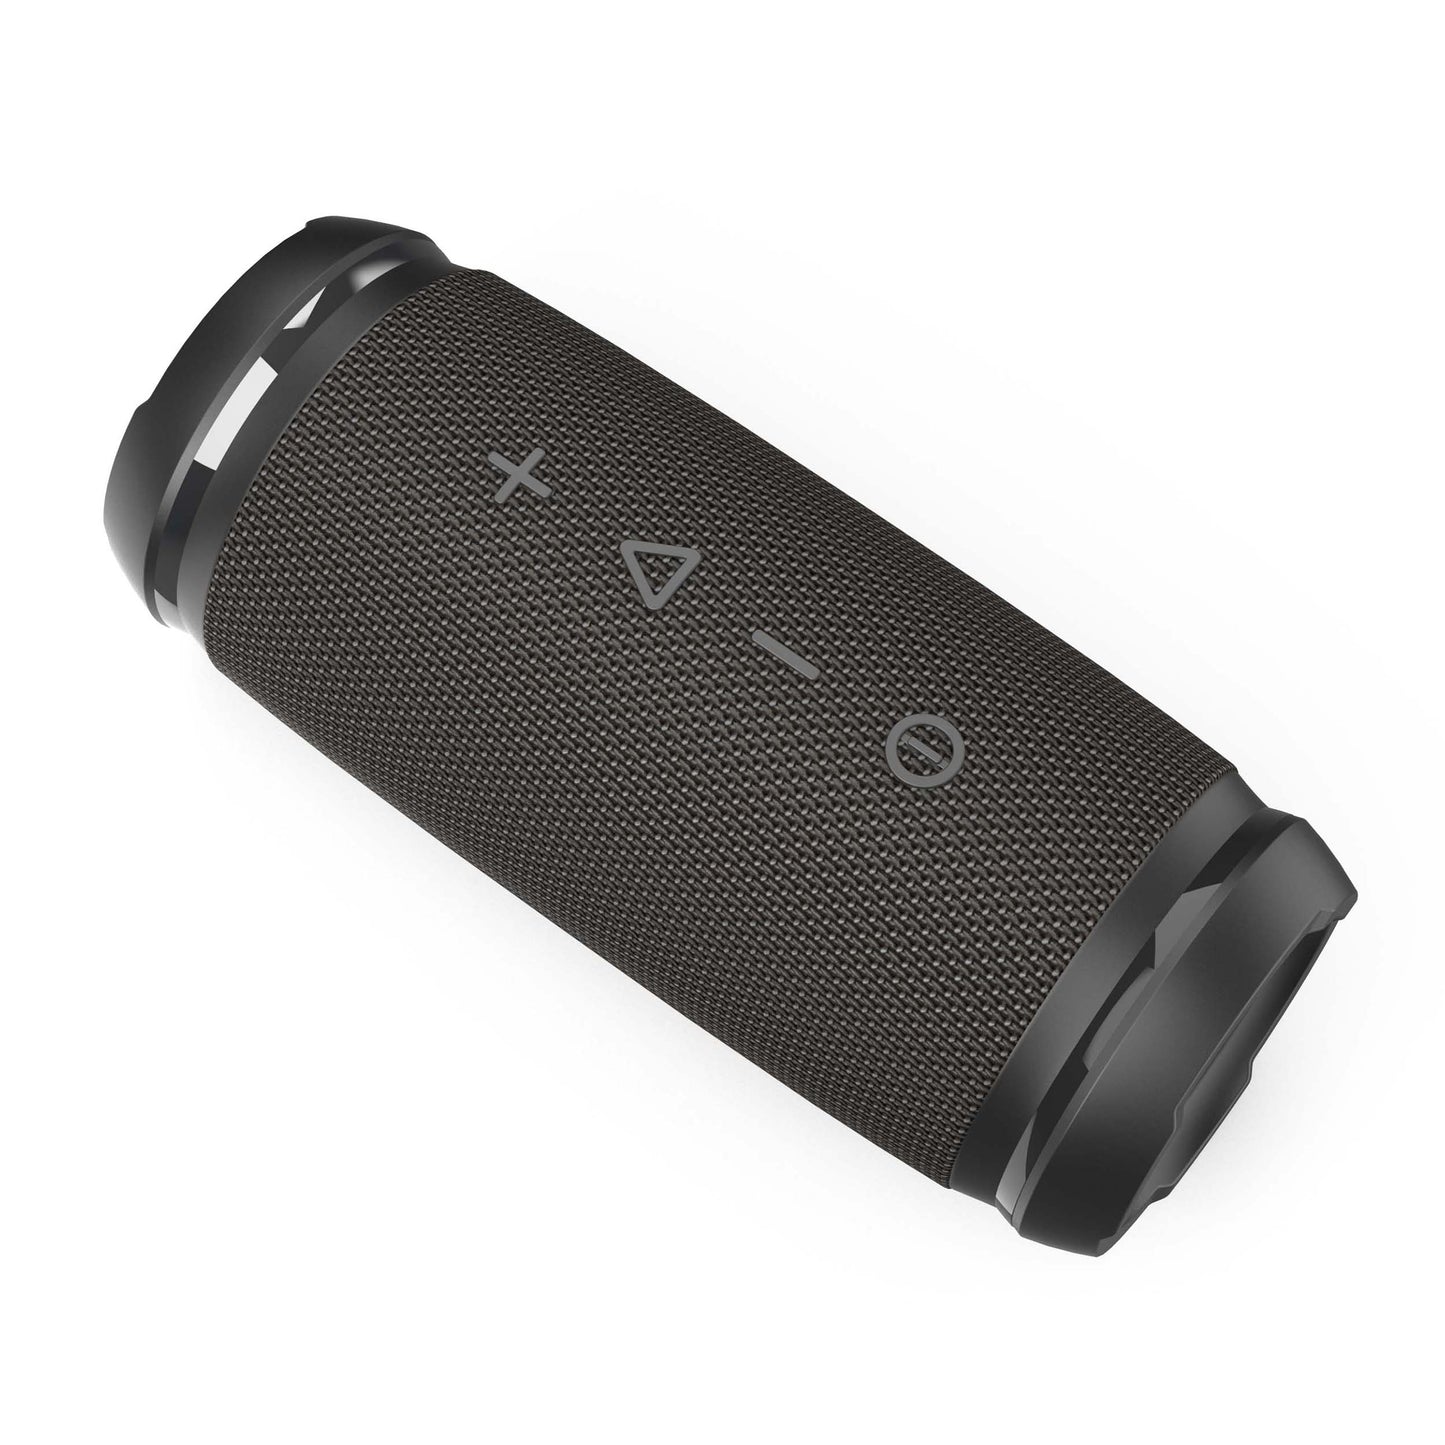 Angled view of the Morpheus 360 Sound Stage Wireless Portable Bluetooth Speaker showing the one touch media controls.